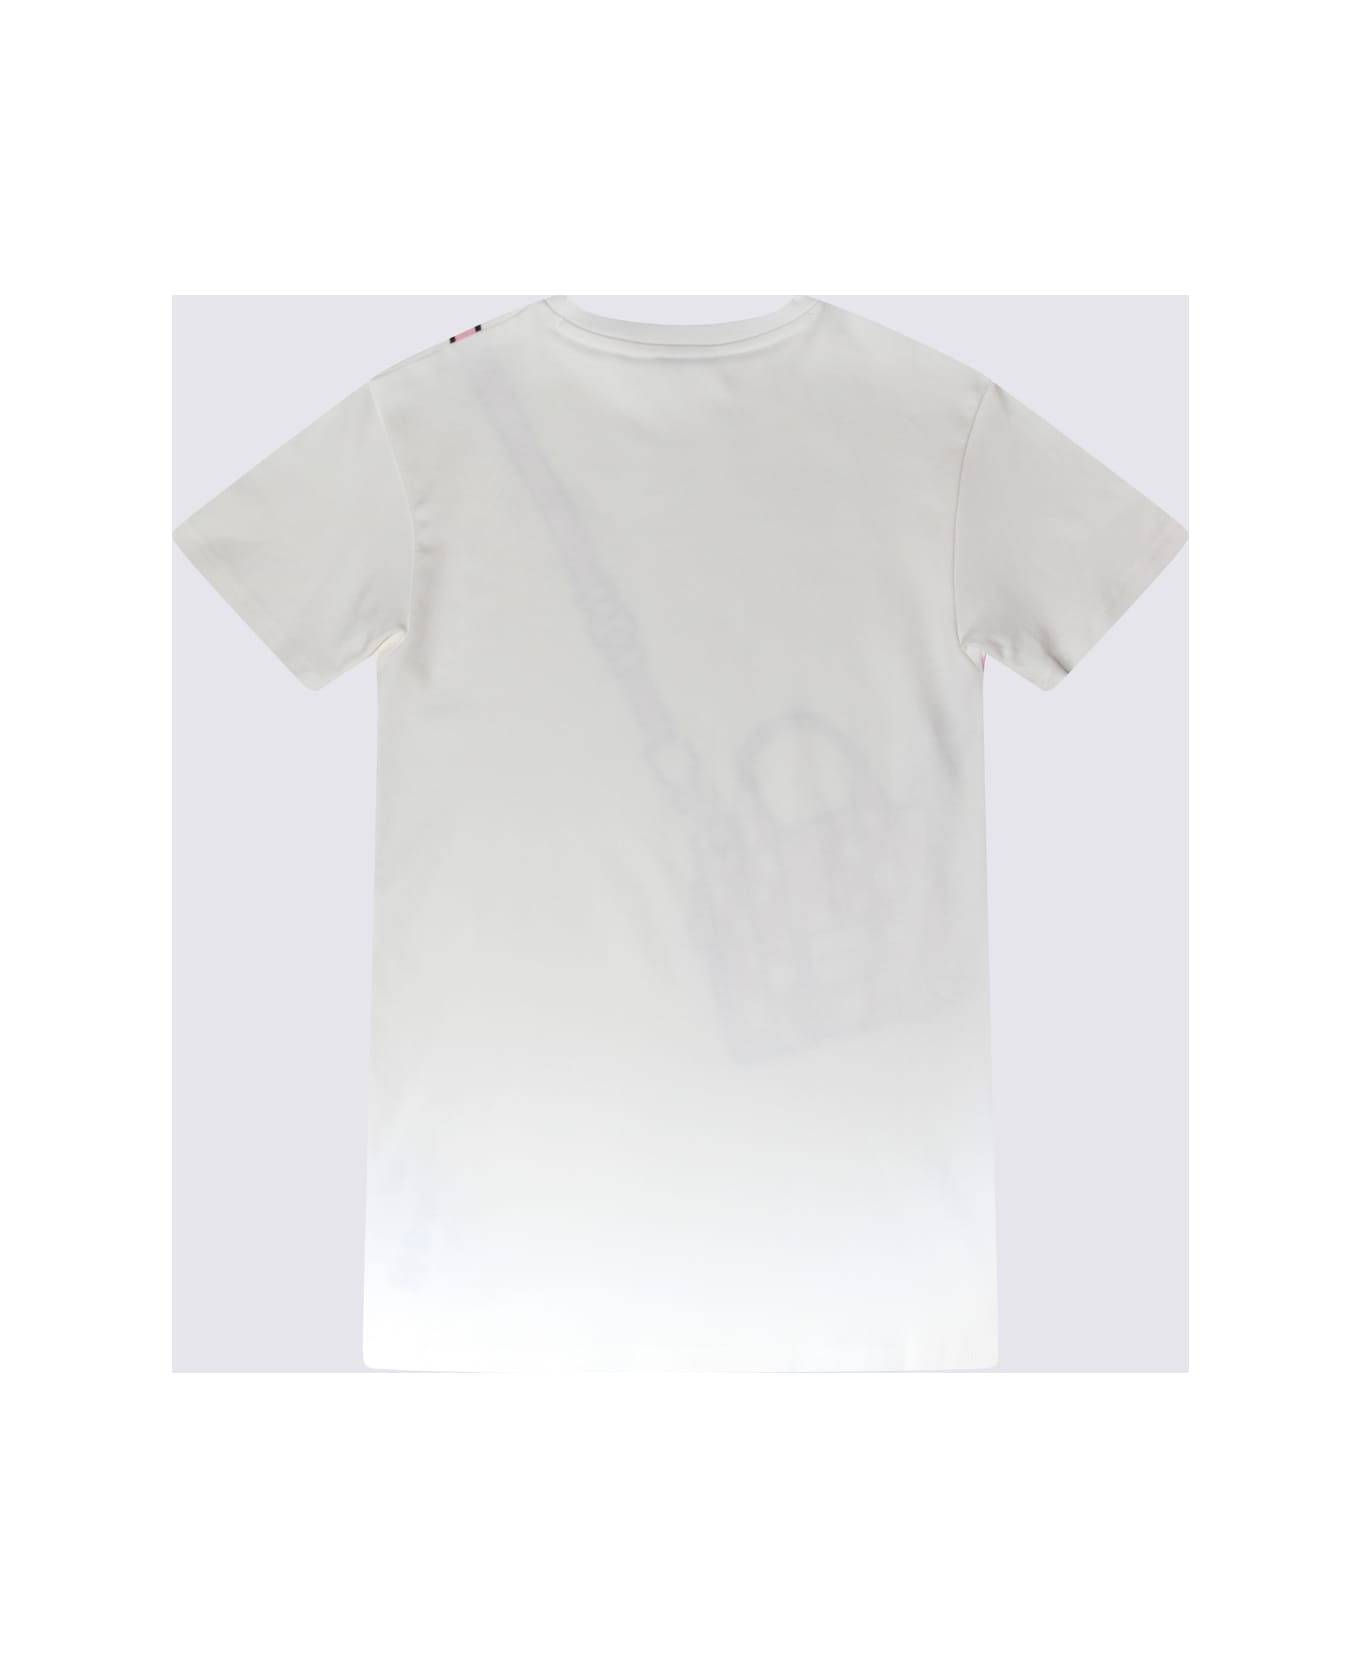 Marc Jacobs White, Pink And Black Cotton T-shirt - Ivory